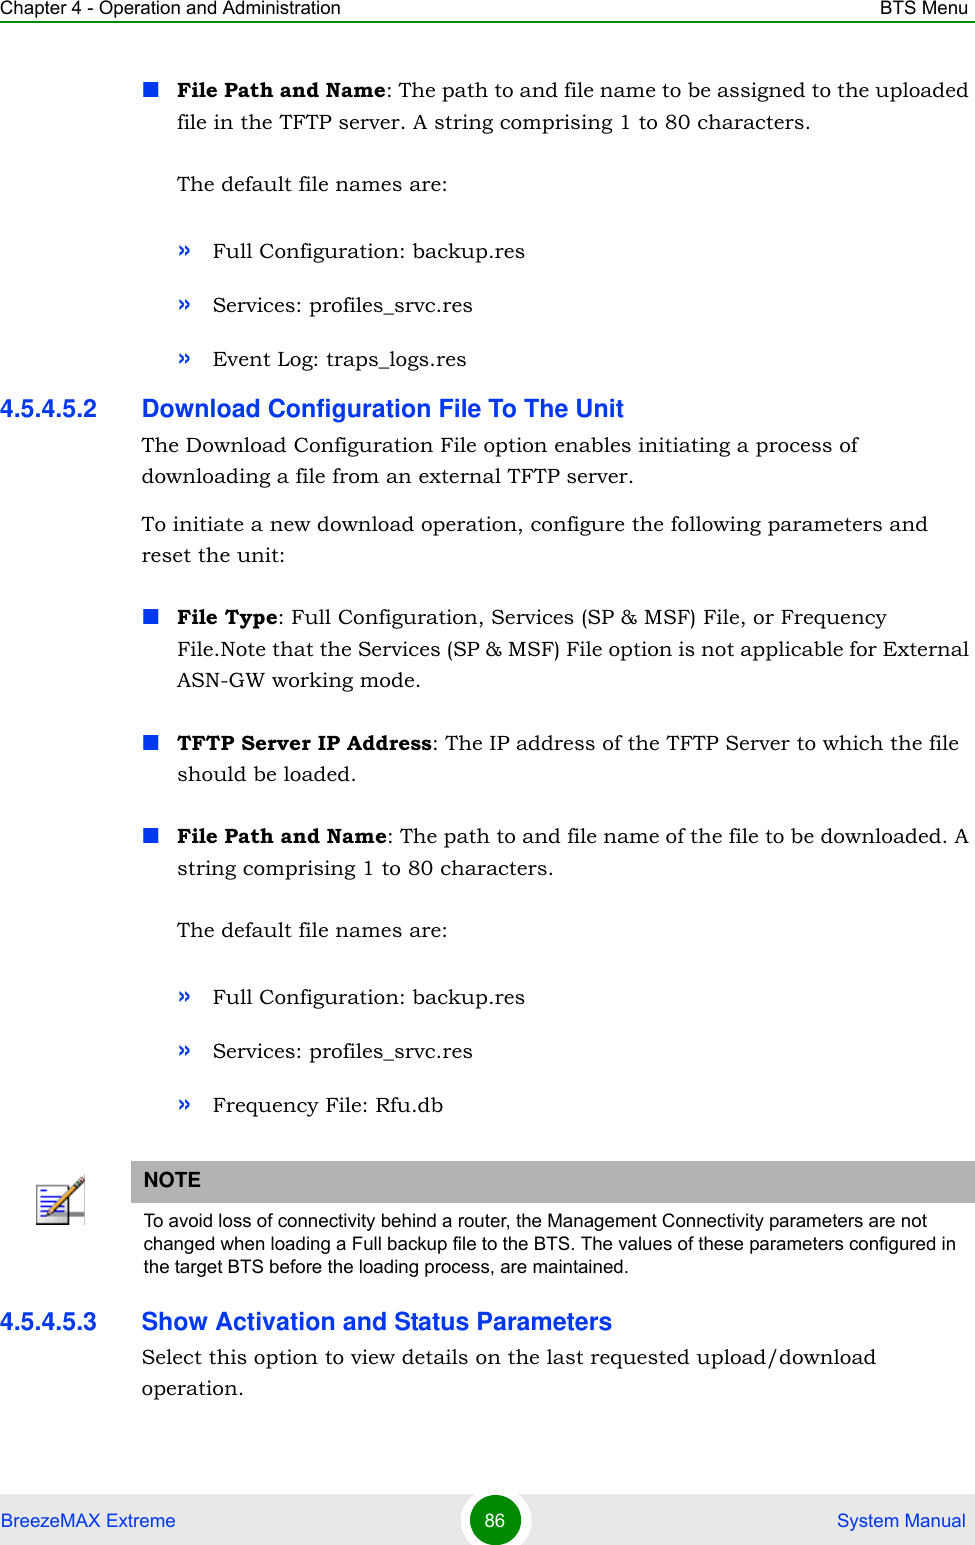 Chapter 4 - Operation and Administration BTS MenuBreezeMAX Extreme 86  System ManualFile Path and Name: The path to and file name to be assigned to the uploaded file in the TFTP server. A string comprising 1 to 80 characters.The default file names are: »Full Configuration: backup.res»Services: profiles_srvc.res»Event Log: traps_logs.res4.5.4.5.2 Download Configuration File To The UnitThe Download Configuration File option enables initiating a process of downloading a file from an external TFTP server. To initiate a new download operation, configure the following parameters and reset the unit:File Type: Full Configuration, Services (SP &amp; MSF) File, or Frequency File.Note that the Services (SP &amp; MSF) File option is not applicable for External ASN-GW working mode.TFTP Server IP Address: The IP address of the TFTP Server to which the file should be loaded.File Path and Name: The path to and file name of the file to be downloaded. A string comprising 1 to 80 characters.The default file names are: »Full Configuration: backup.res»Services: profiles_srvc.res»Frequency File: Rfu.db4.5.4.5.3 Show Activation and Status ParametersSelect this option to view details on the last requested upload/download operation.NOTETo avoid loss of connectivity behind a router, the Management Connectivity parameters are not changed when loading a Full backup file to the BTS. The values of these parameters configured in the target BTS before the loading process, are maintained.